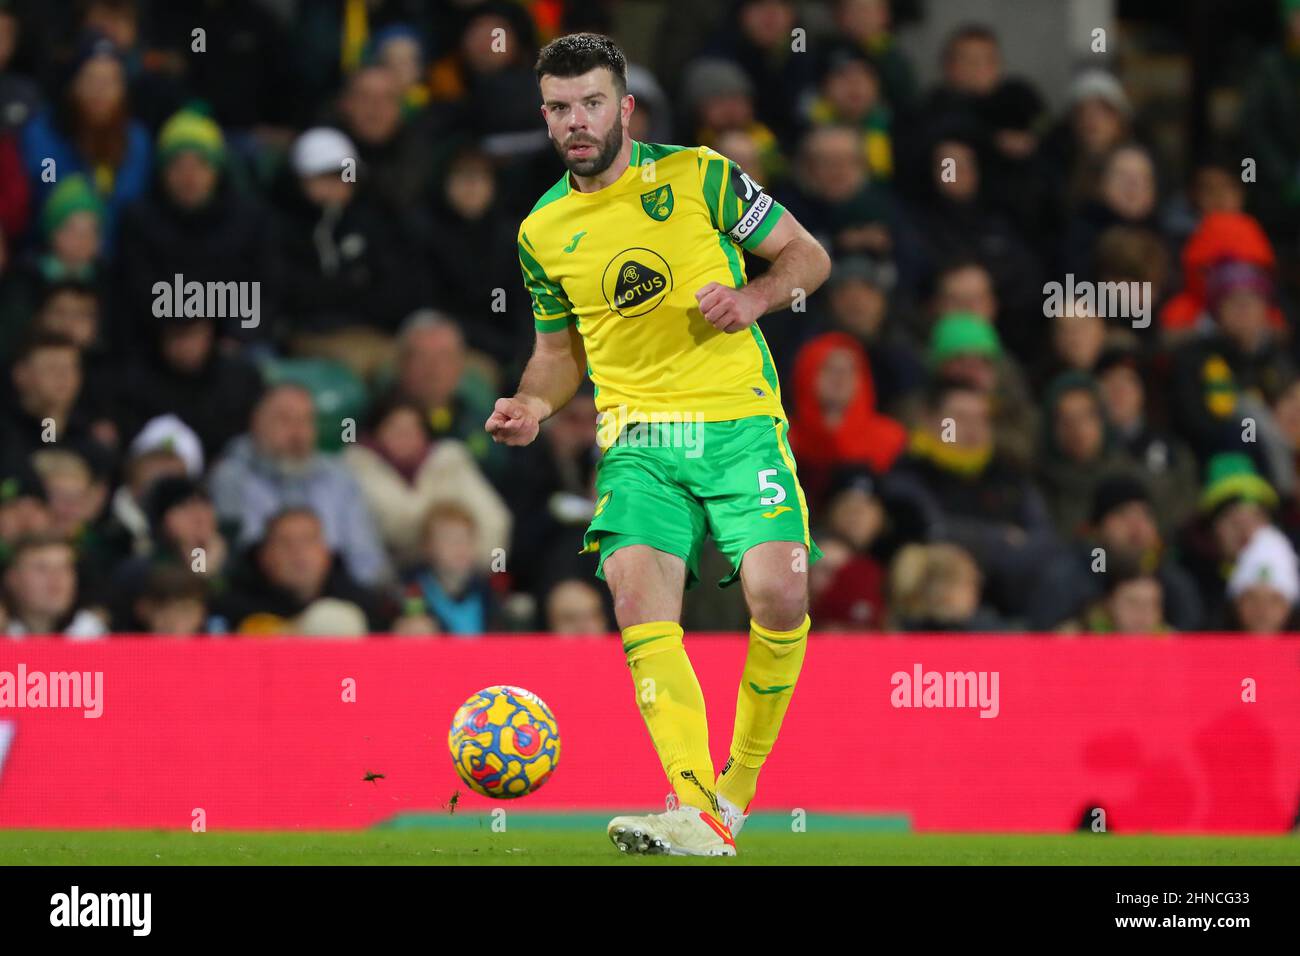 Grant Hanley of Norwich City - Norwich City v Manchester City, Premier League, Carrow Road, Norwich, UK - 12th February 2022  Editorial Use Only - DataCo restrictions apply Stock Photo